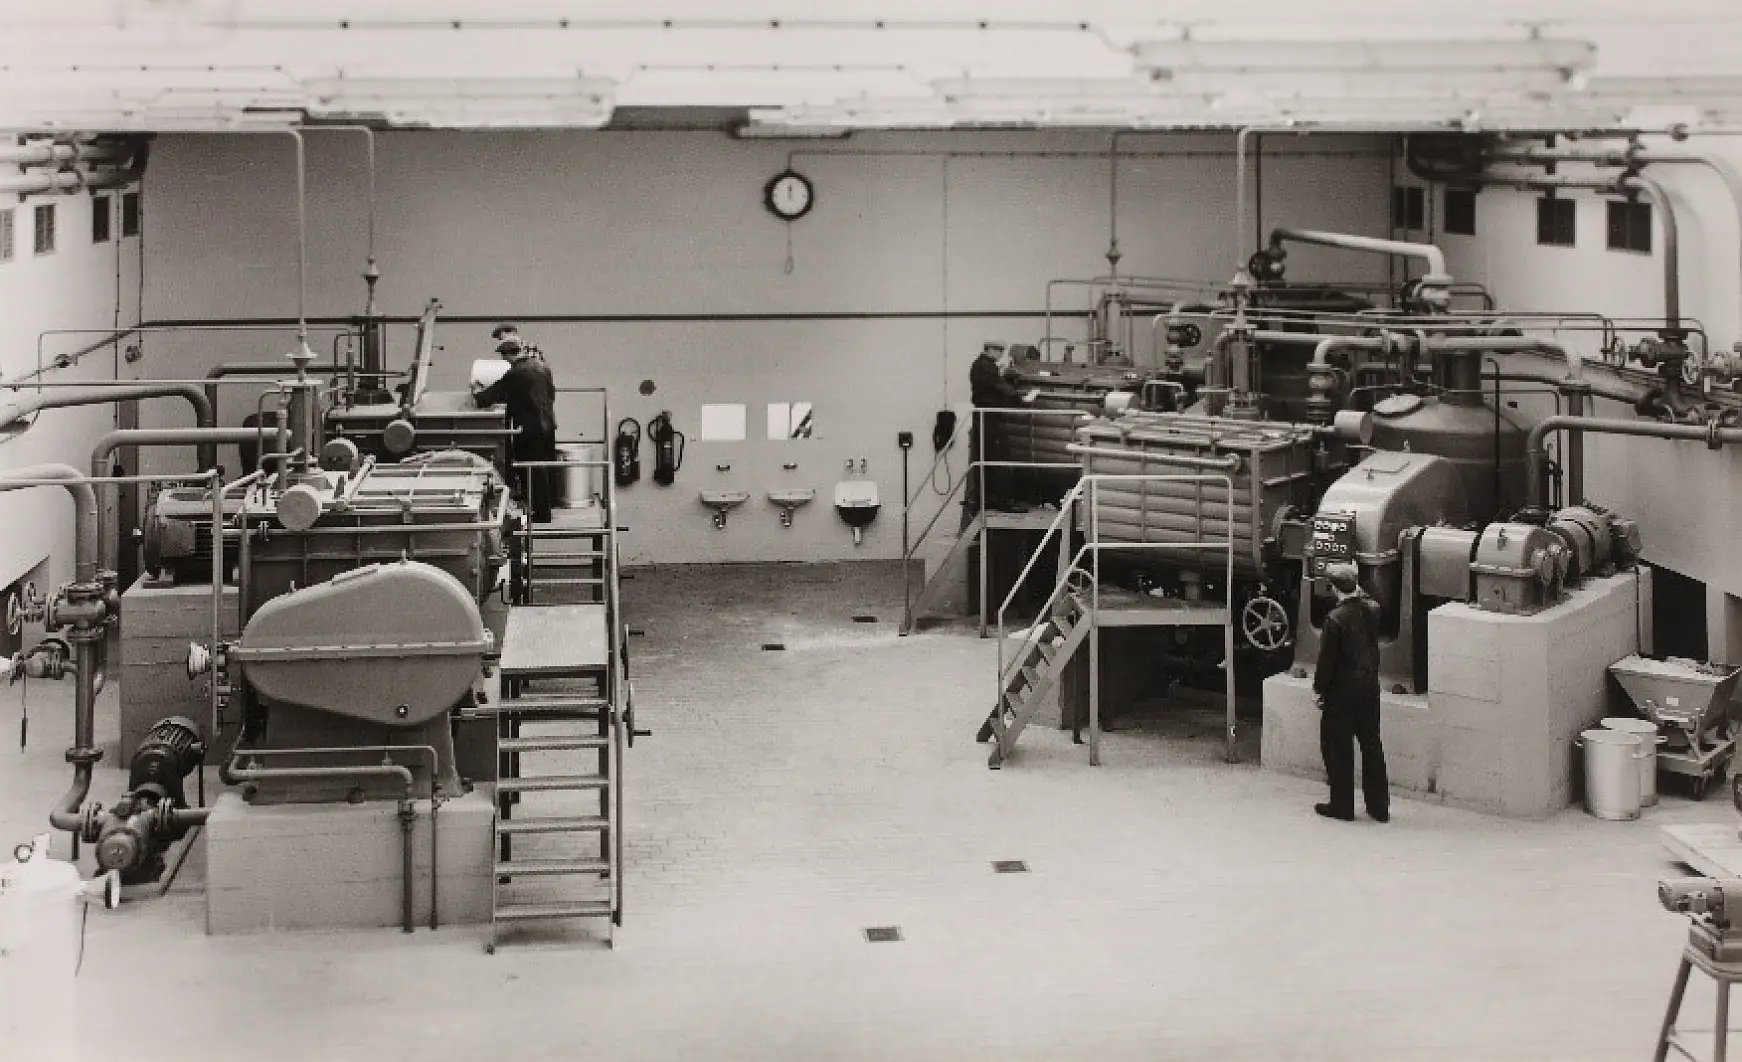 In 1961, the preparation of adhesives with rubber, resins and other raw materials took place in the kneading room.